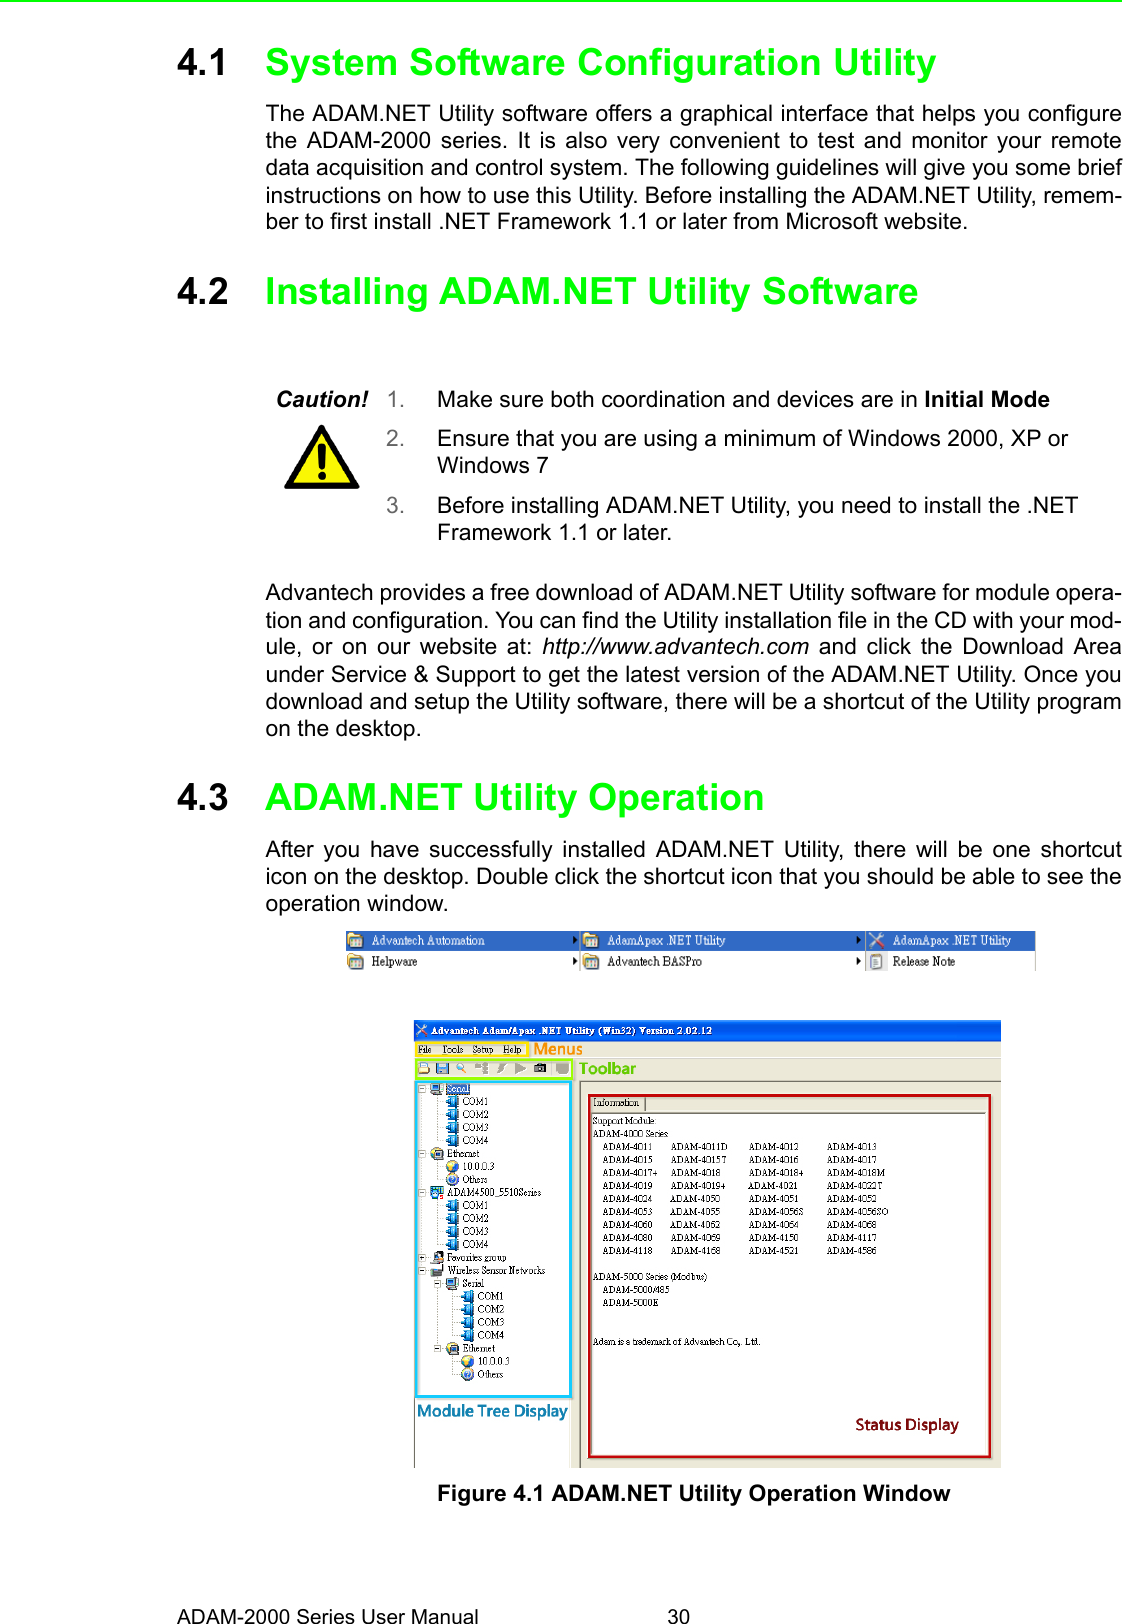 ADAM-2000 Series User Manual 304.1 System Software Configuration UtilityThe ADAM.NET Utility software offers a graphical interface that helps you configurethe ADAM-2000 series. It is also very convenient to test and monitor your remotedata acquisition and control system. The following guidelines will give you some briefinstructions on how to use this Utility. Before installing the ADAM.NET Utility, remem-ber to first install .NET Framework 1.1 or later from Microsoft website. 4.2 Installing ADAM.NET Utility SoftwareAdvantech provides a free download of ADAM.NET Utility software for module opera-tion and configuration. You can find the Utility installation file in the CD with your mod-ule, or on our website at: http://www.advantech.com and click the Download Areaunder Service &amp; Support to get the latest version of the ADAM.NET Utility. Once youdownload and setup the Utility software, there will be a shortcut of the Utility programon the desktop. 4.3 ADAM.NET Utility Operation After you have successfully installed ADAM.NET Utility, there will be one shortcuticon on the desktop. Double click the shortcut icon that you should be able to see theoperation window.Figure 4.1 ADAM.NET Utility Operation WindowCaution! 1. Make sure both coordination and devices are in Initial Mode2. Ensure that you are using a minimum of Windows 2000, XP or Windows 73. Before installing ADAM.NET Utility, you need to install the .NET Framework 1.1 or later. 